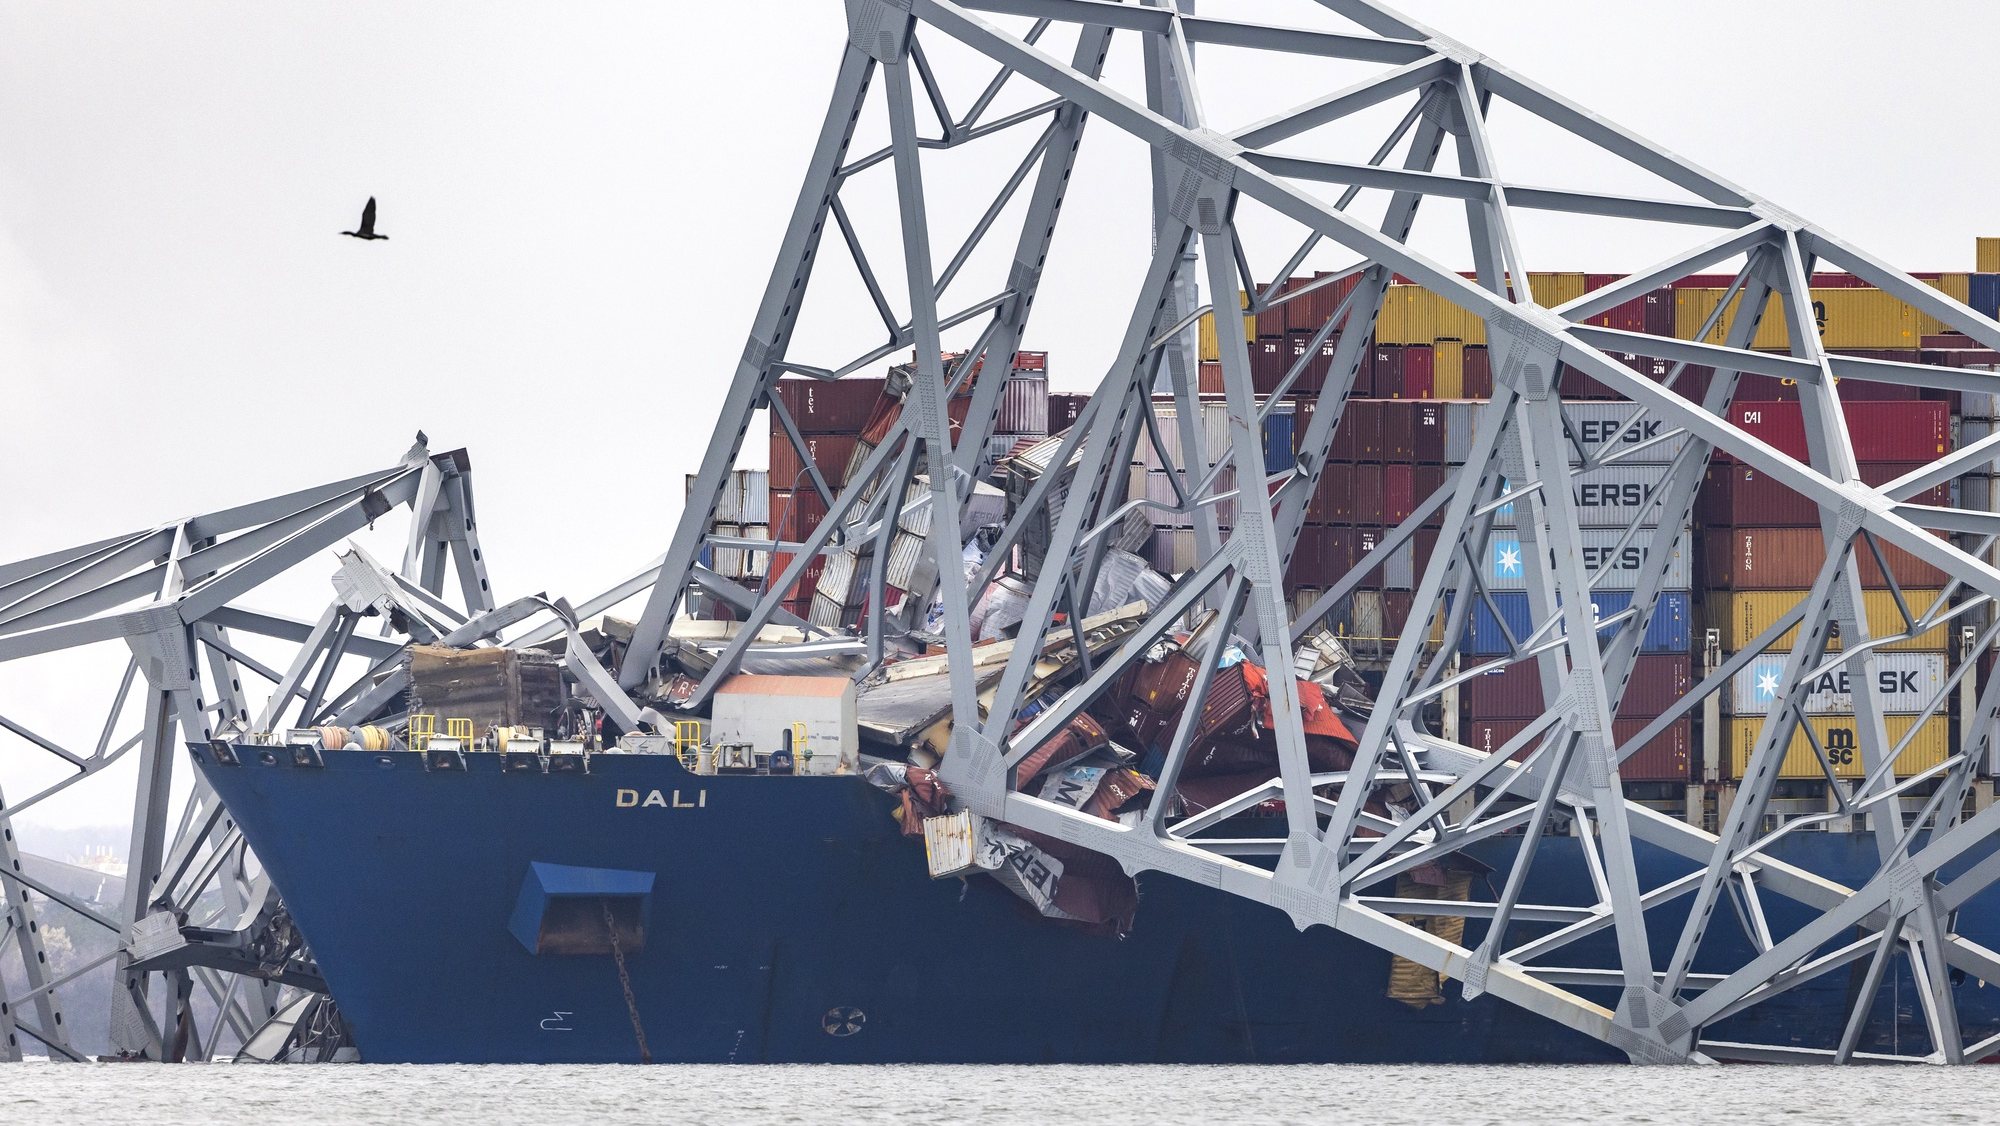 epa11246903 Wreckage from the Francis Scott Key Bridge remains on top of the 984-foot cargo ship Dali after the vessel lost power and collided with the 51-year-old bridge in Baltimore, Maryland, USA, 27 March 2024. The Francis Scott Key Bridge collapsed due to a ship strike on 26 March 2024. Two people were rescued, while at least six others, all members of a construction crew working on the bridge at the time of the incident according to authorities, were still missing. Divers are working to recover the bodies of the six missing construction workers, who are now presumed dead, the US Coast Guard said.  EPA/JIM LO SCALZO